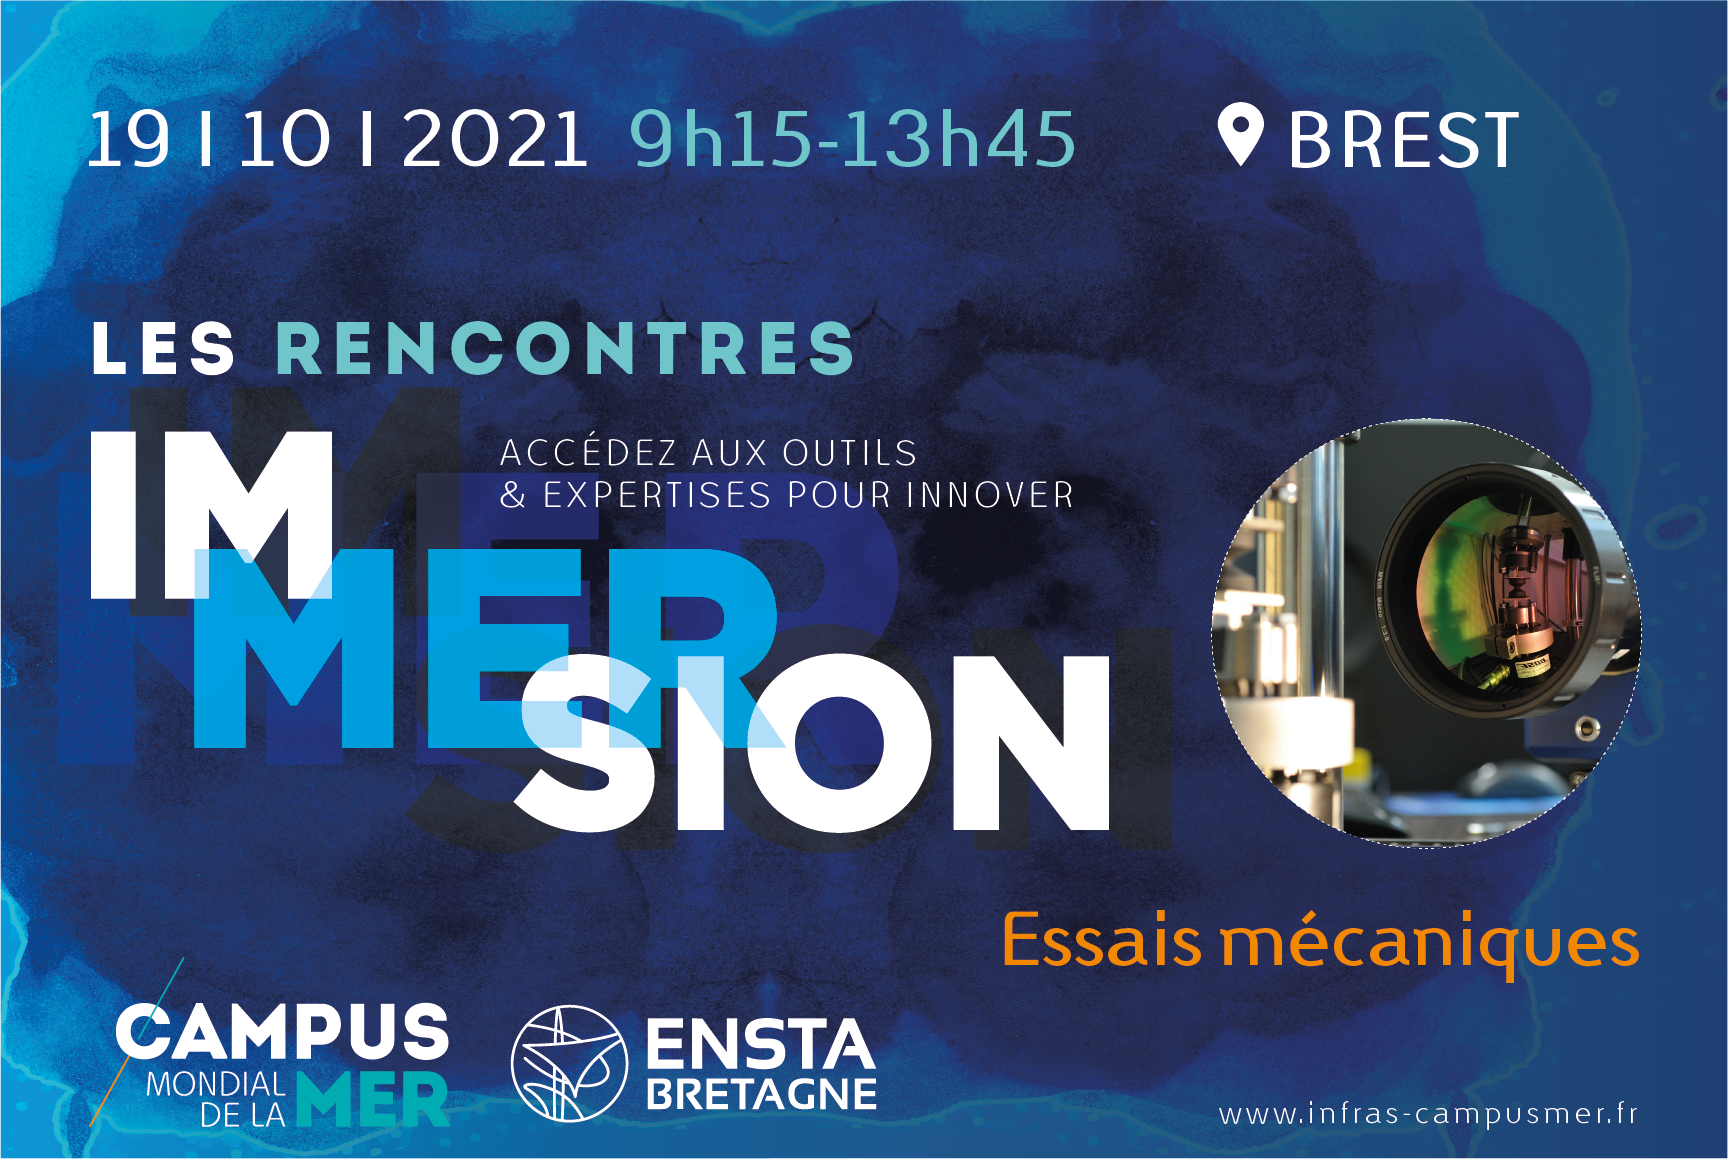 Rencontres Immersion n°3